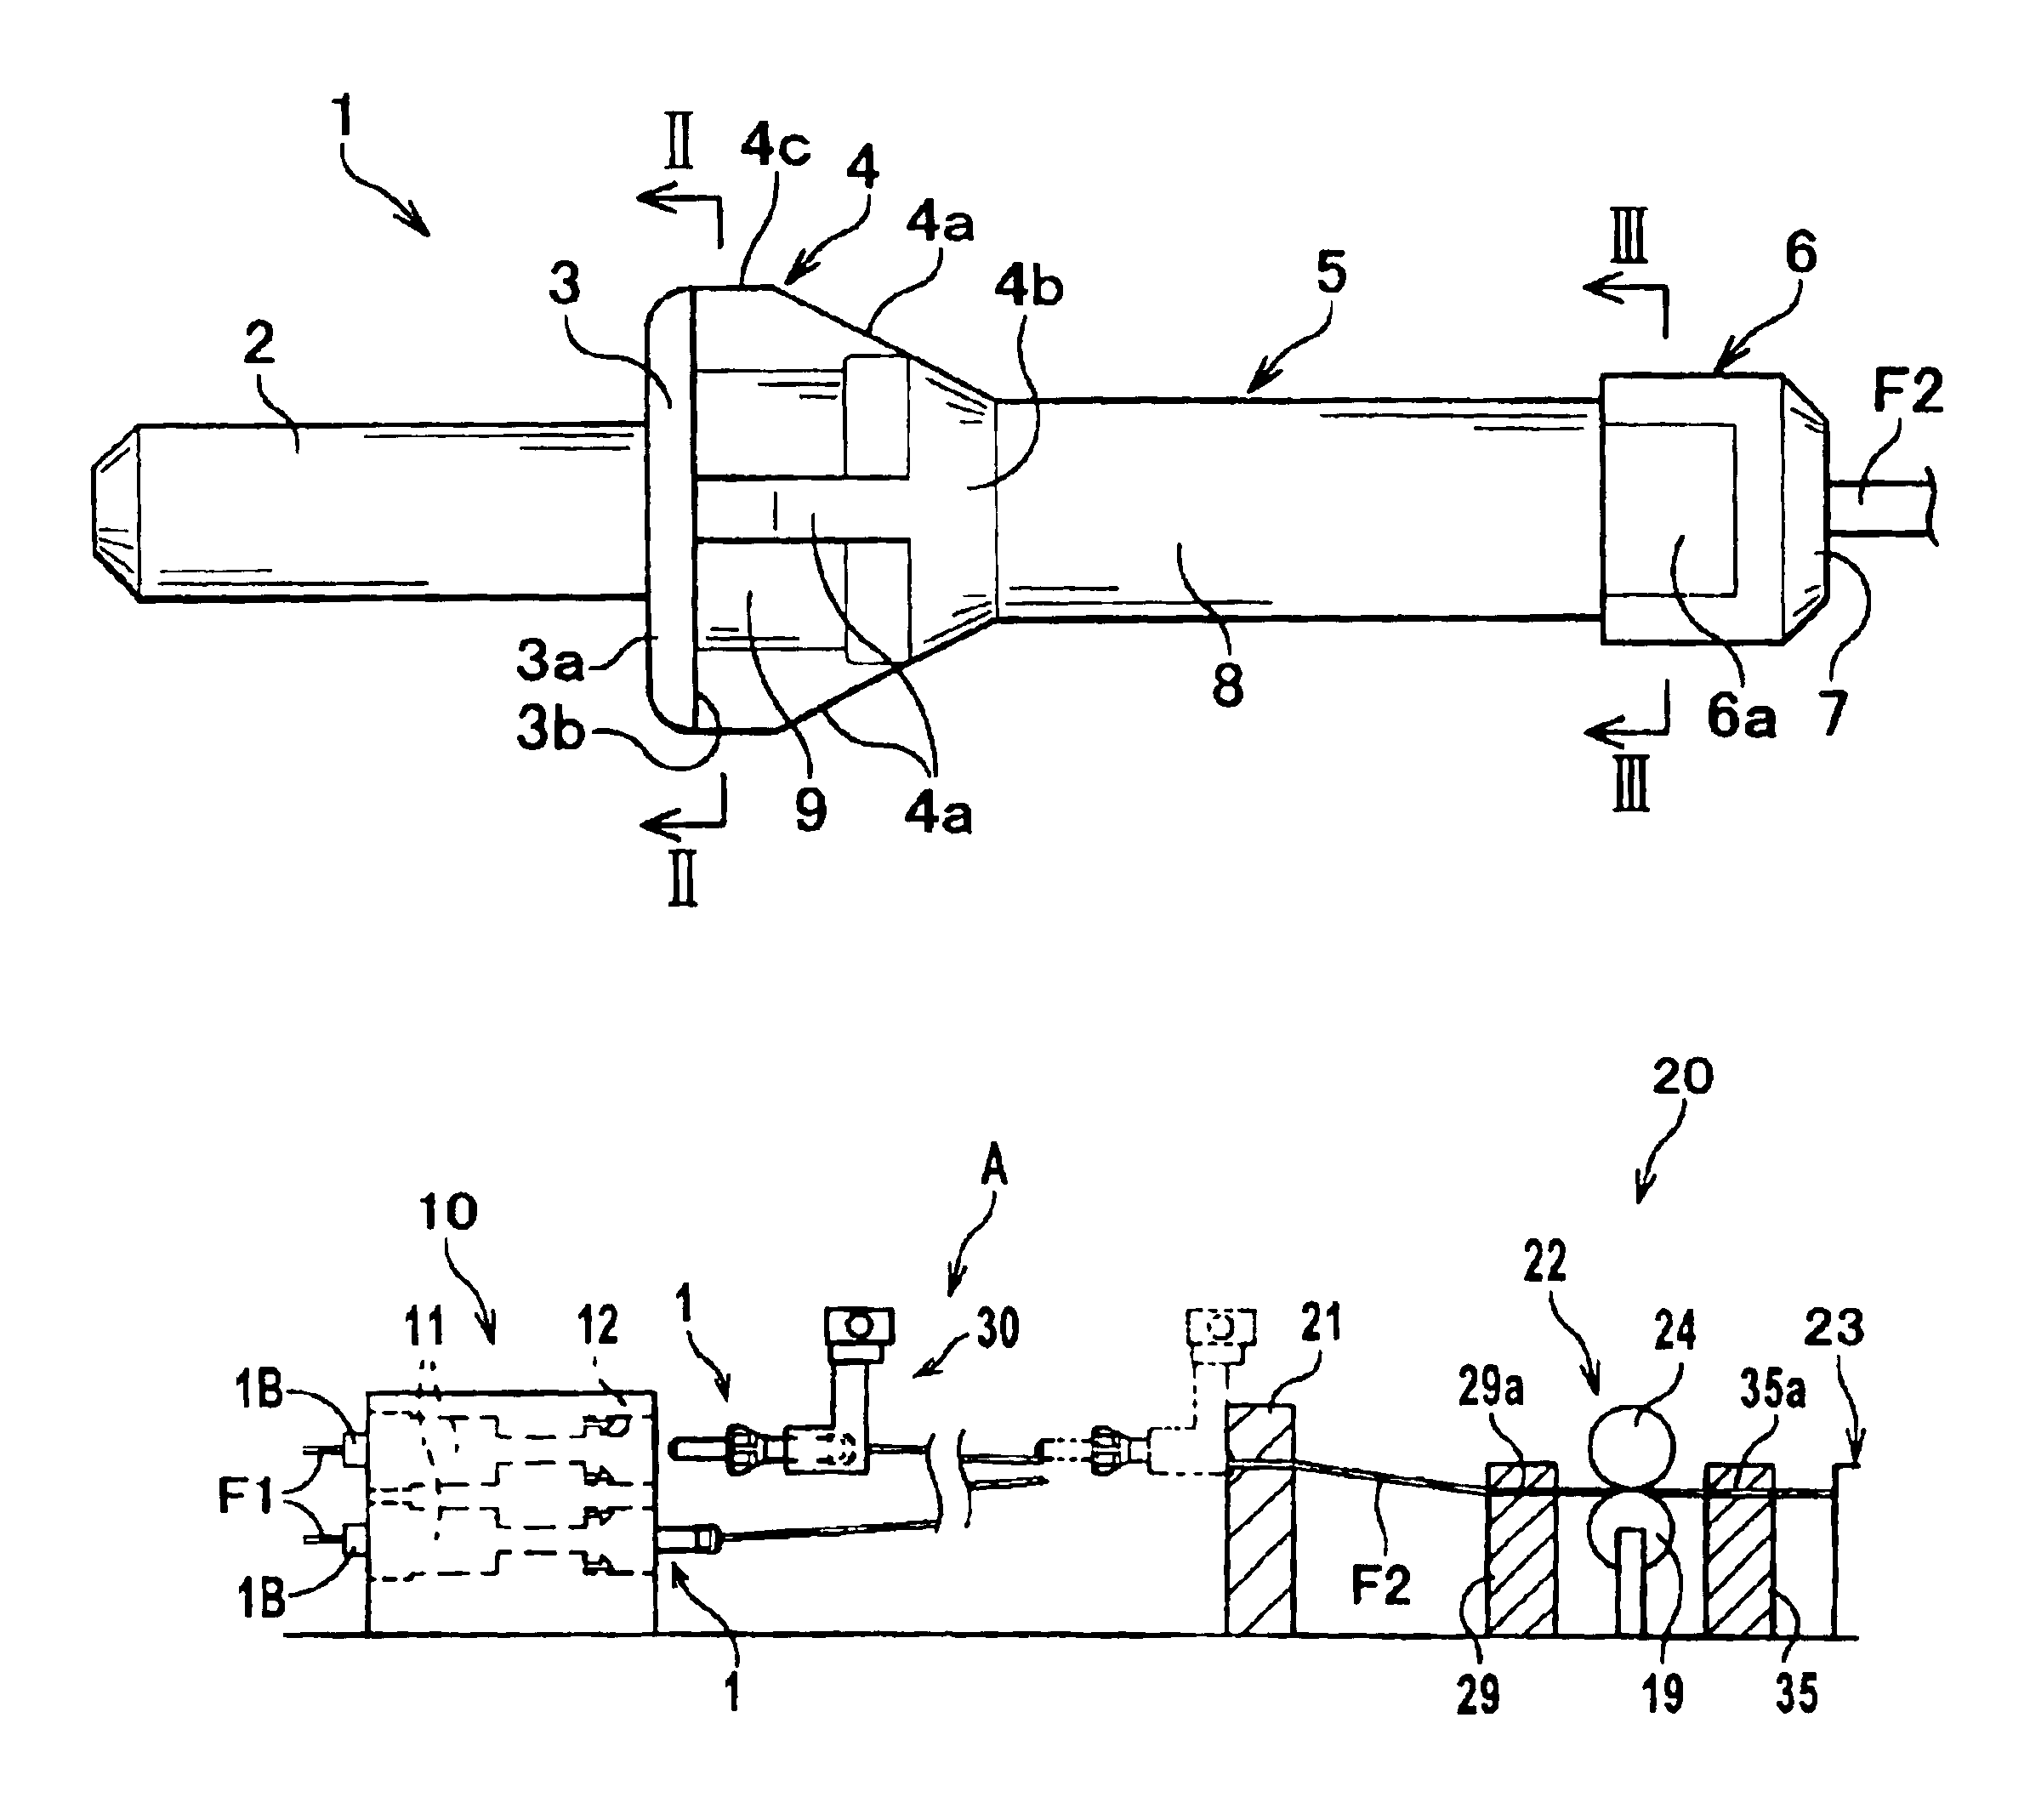 Optical fiber cross-connect with a connection block, an alignment block and a handling device